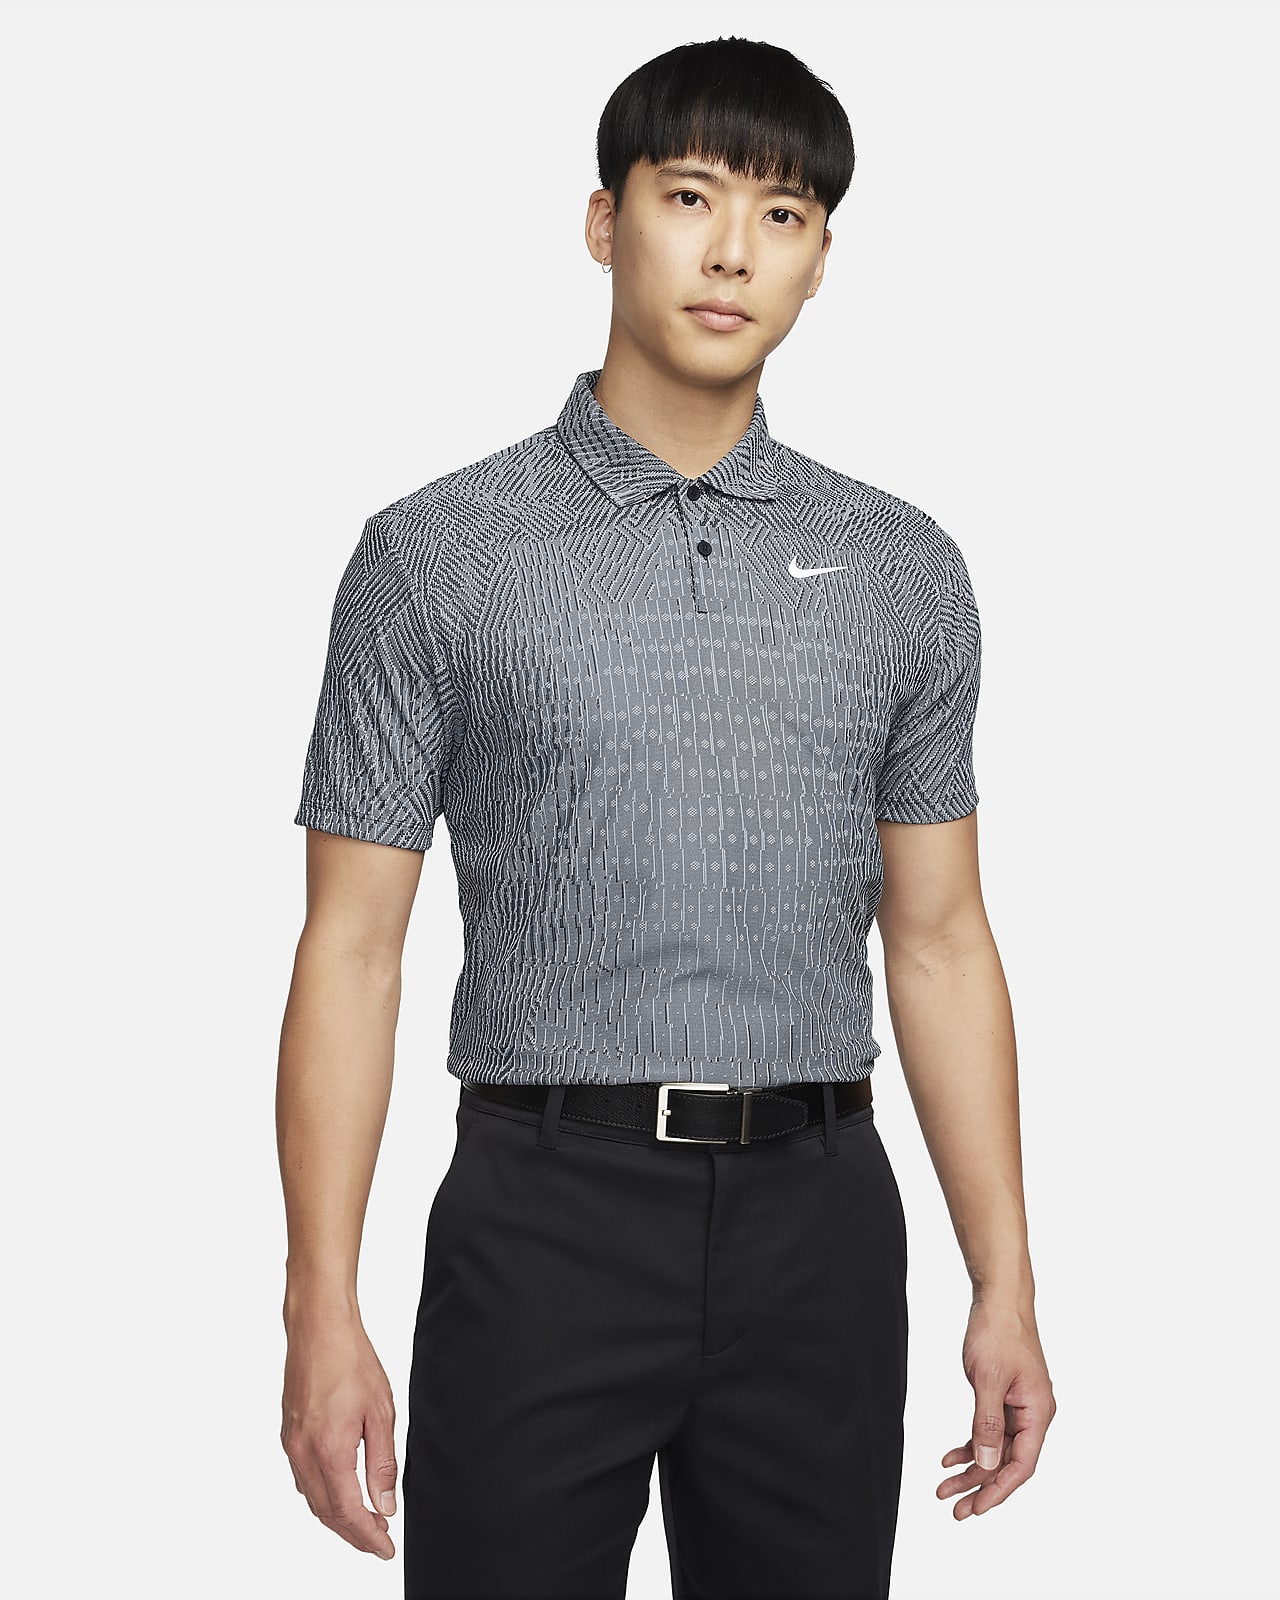 Nike Tour Dri-FIT ADV golfpolo voor heren